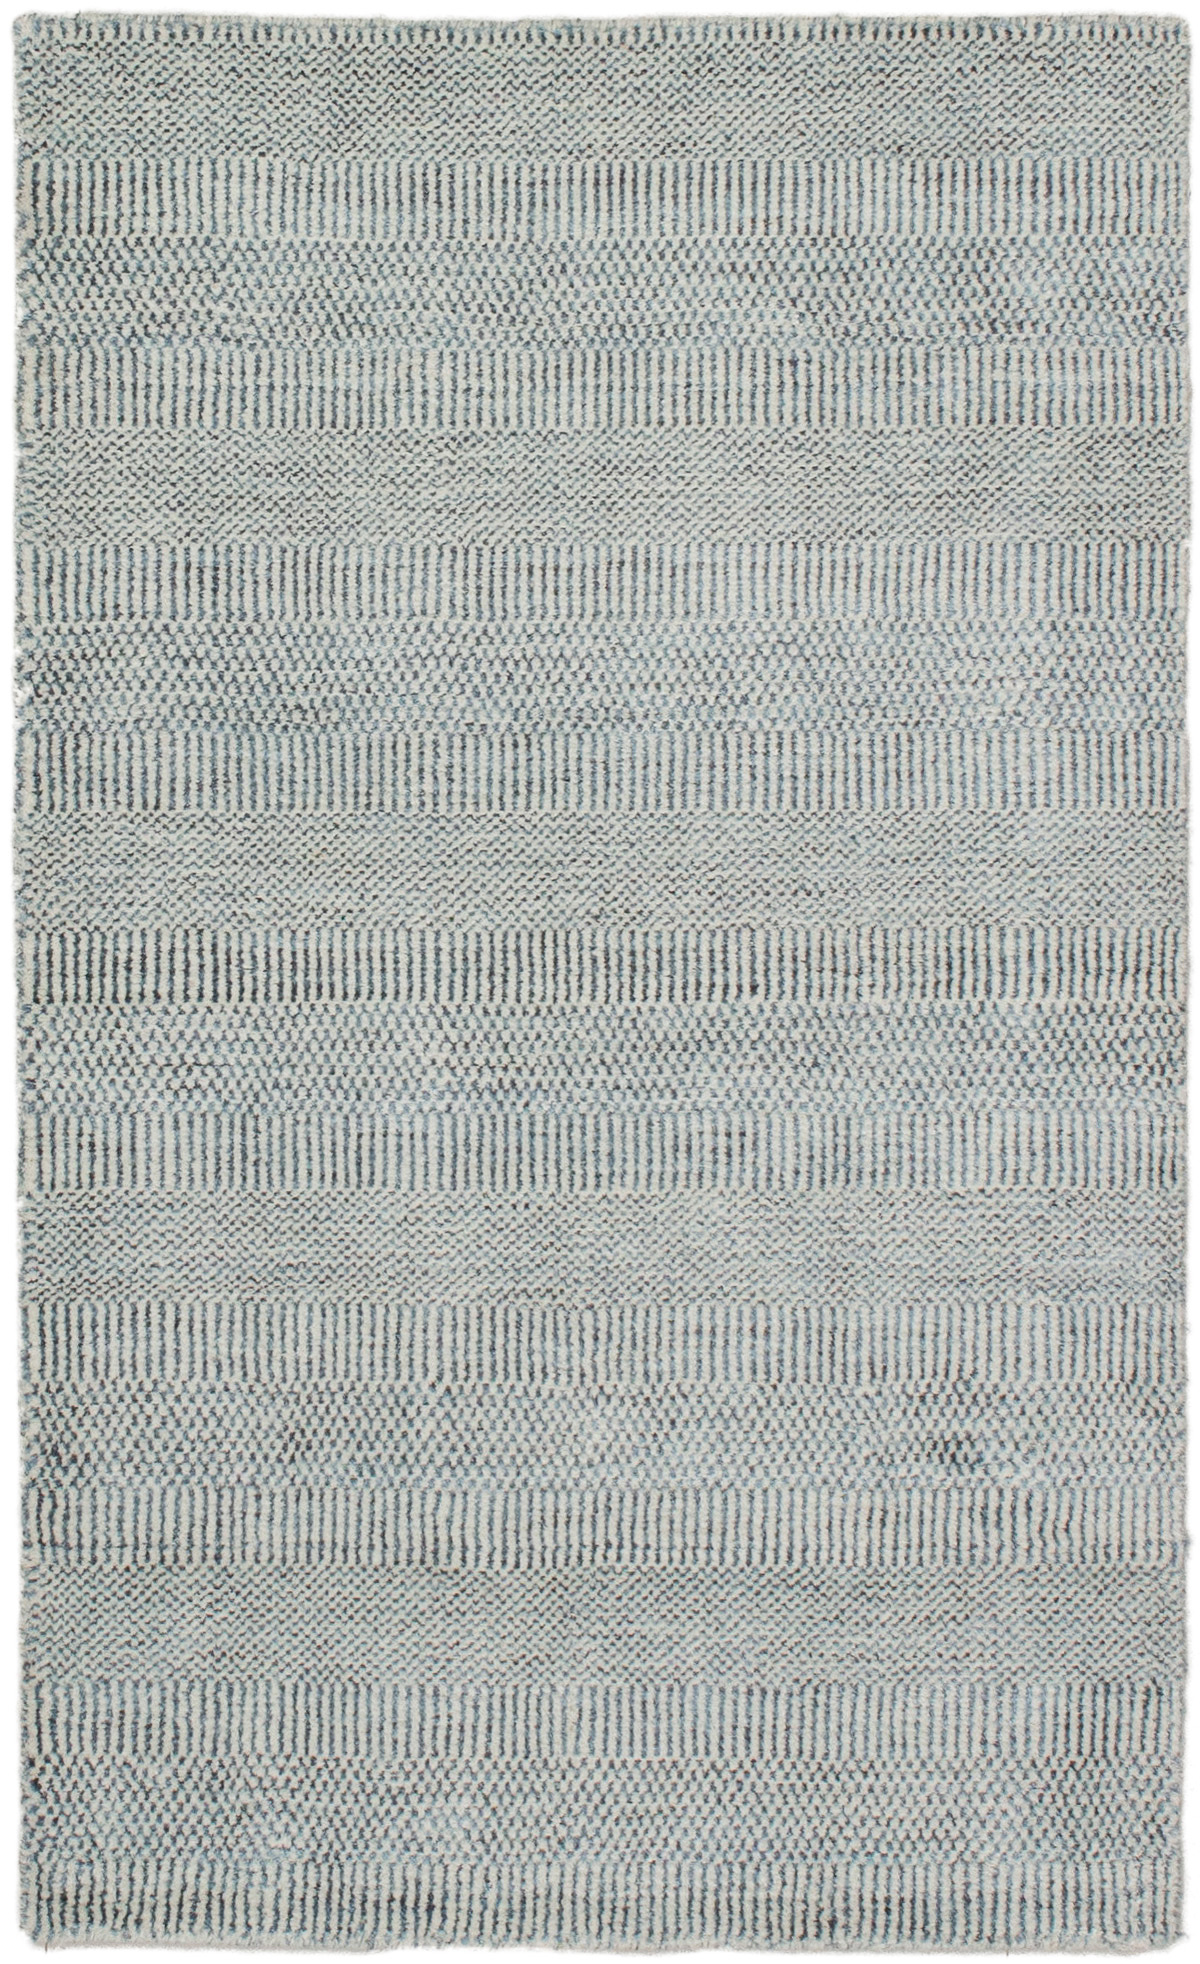 Hand-knotted Pearl Denim Blue  Rug 3'0" x 5'0"  Size: 3'0" x 5'0"  